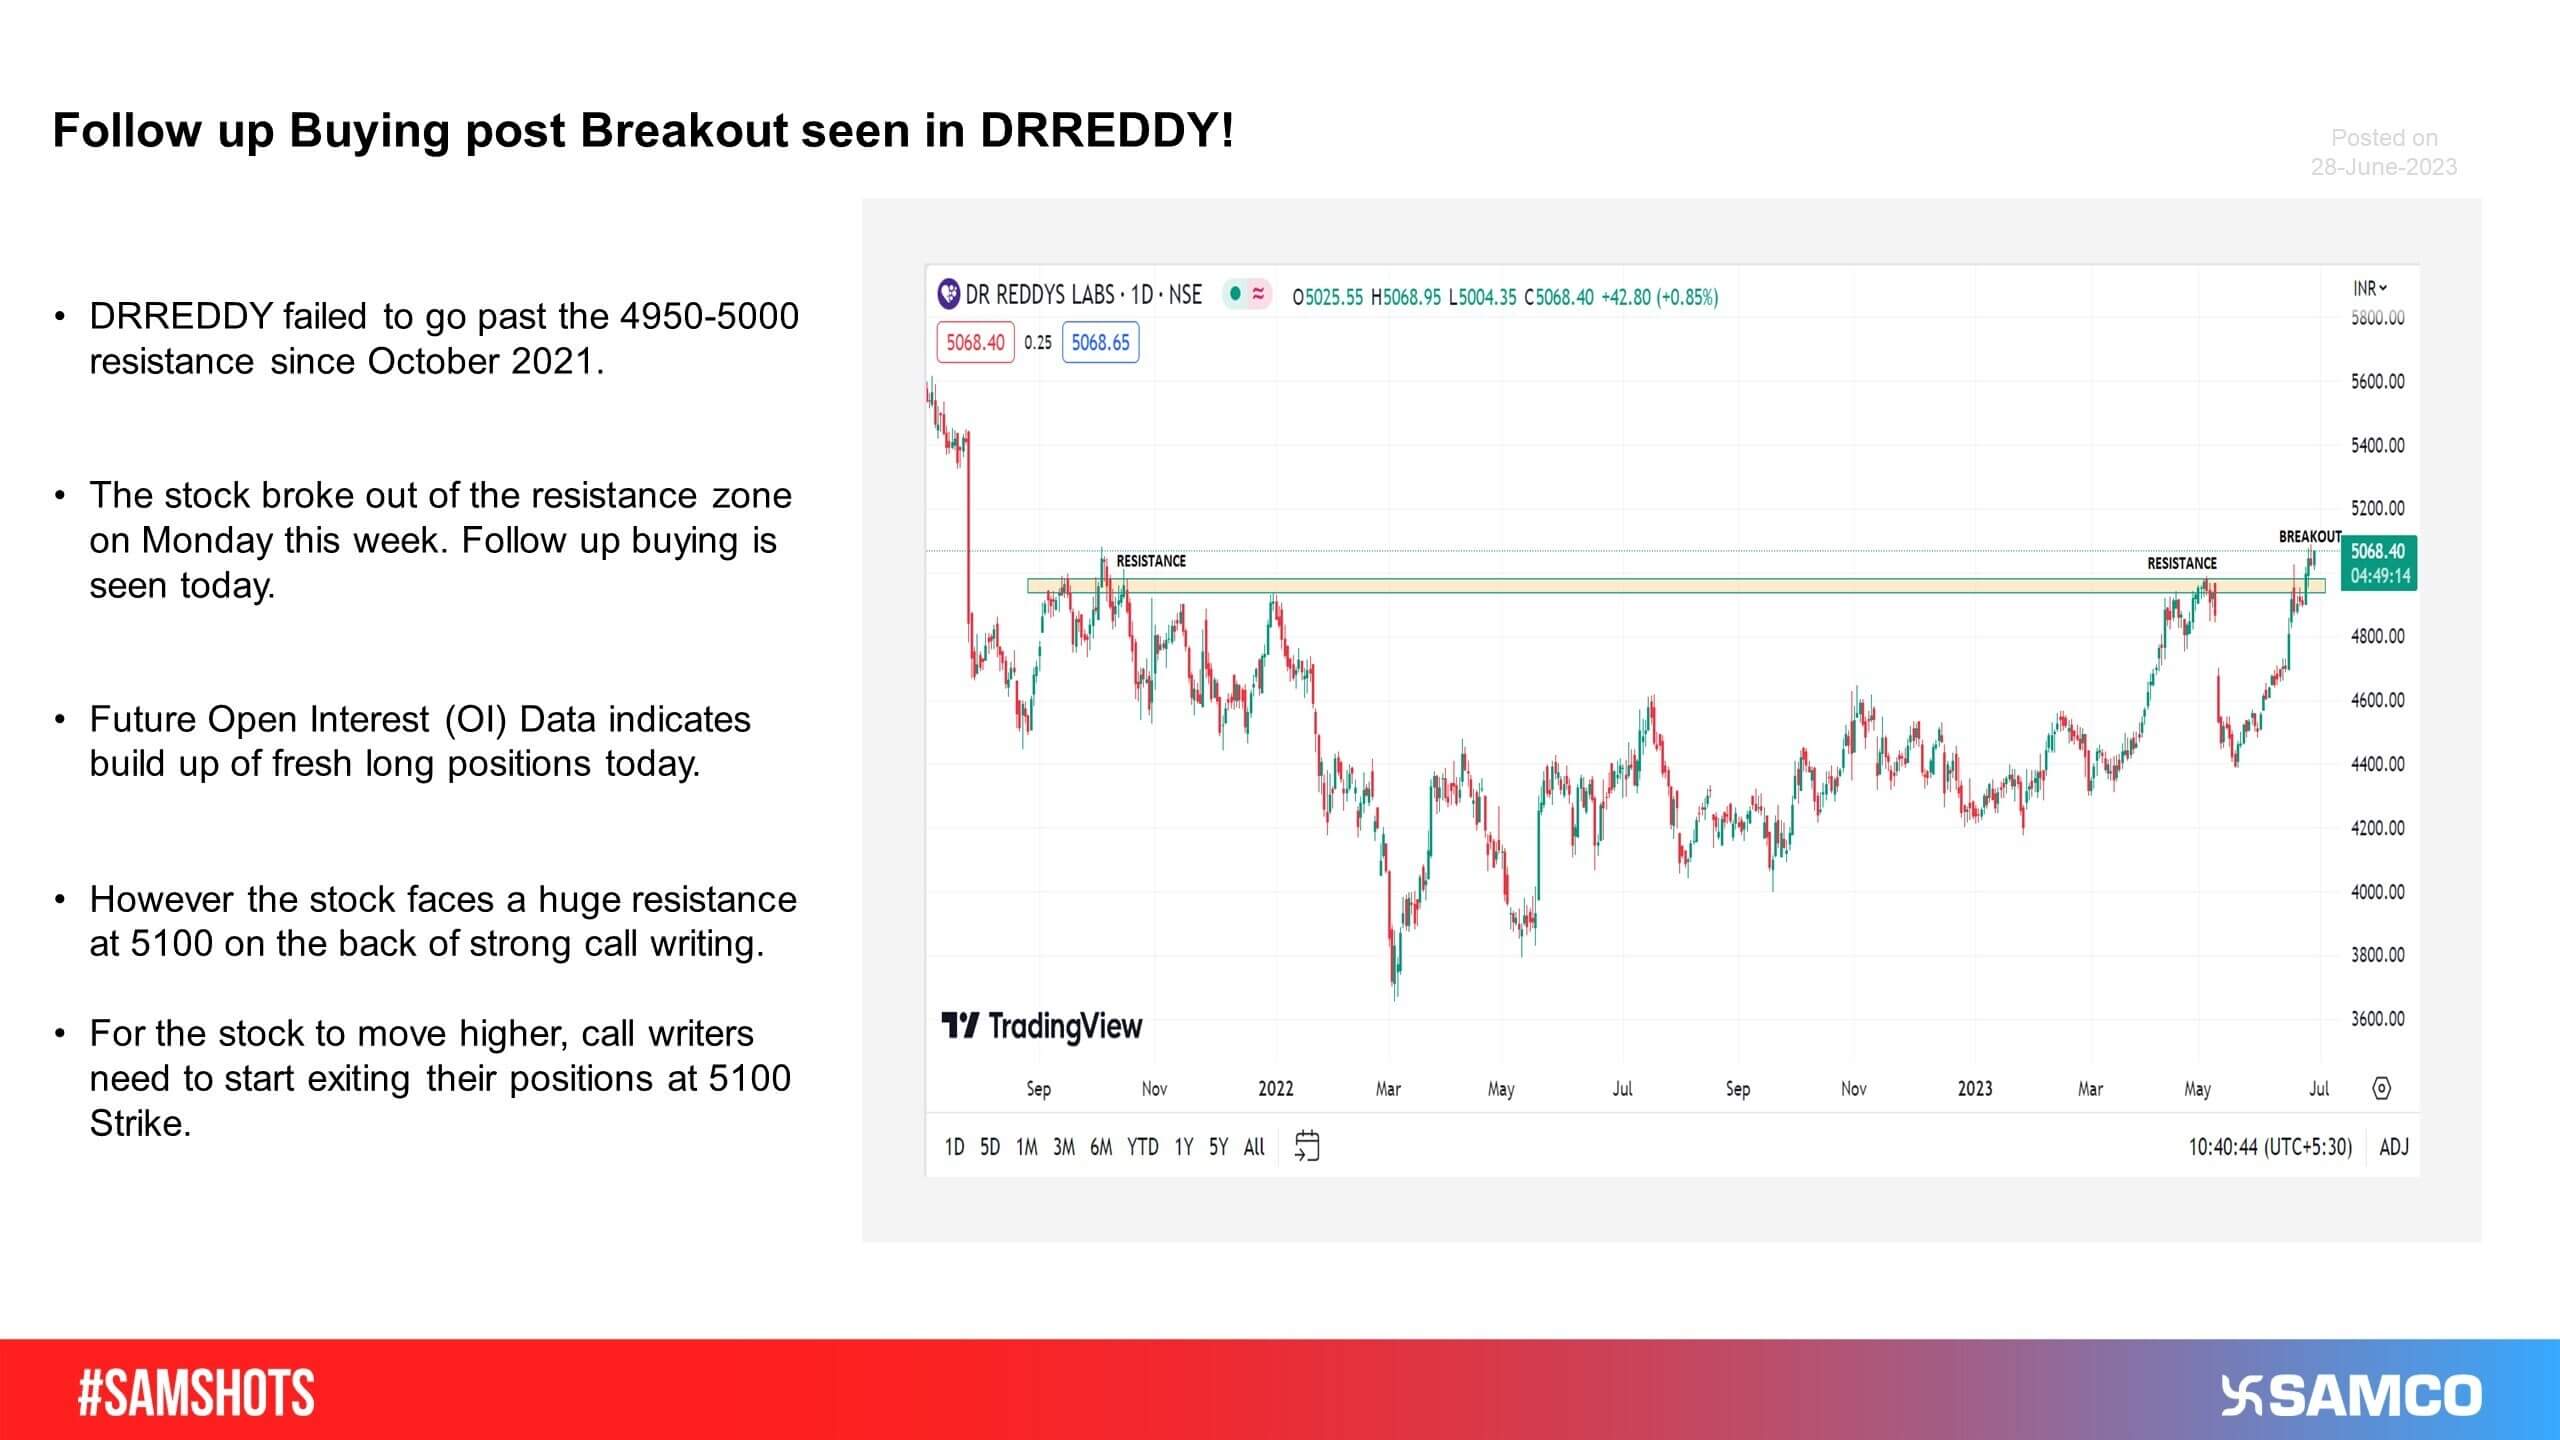 DRREDDY is set for an upmove after it broke out of its major resistance zone of 4950-5000. The stock failed to go past this zone since October, 2021.